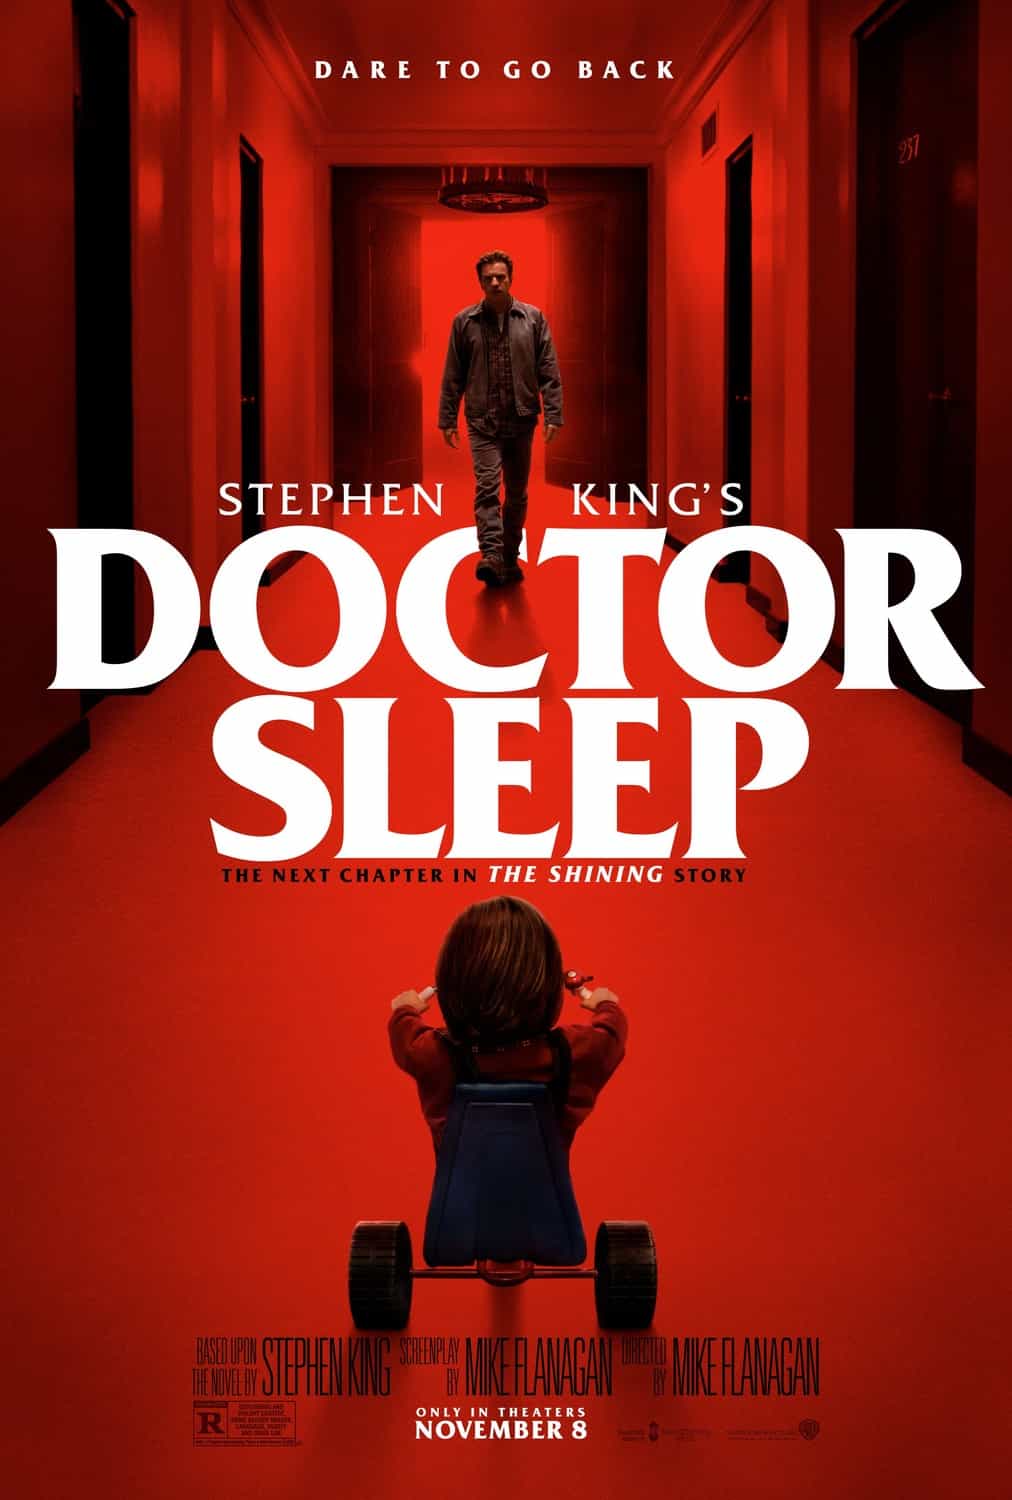 Lets take a trip back to the The Shining universe in the first trailer for Doctor Sleep